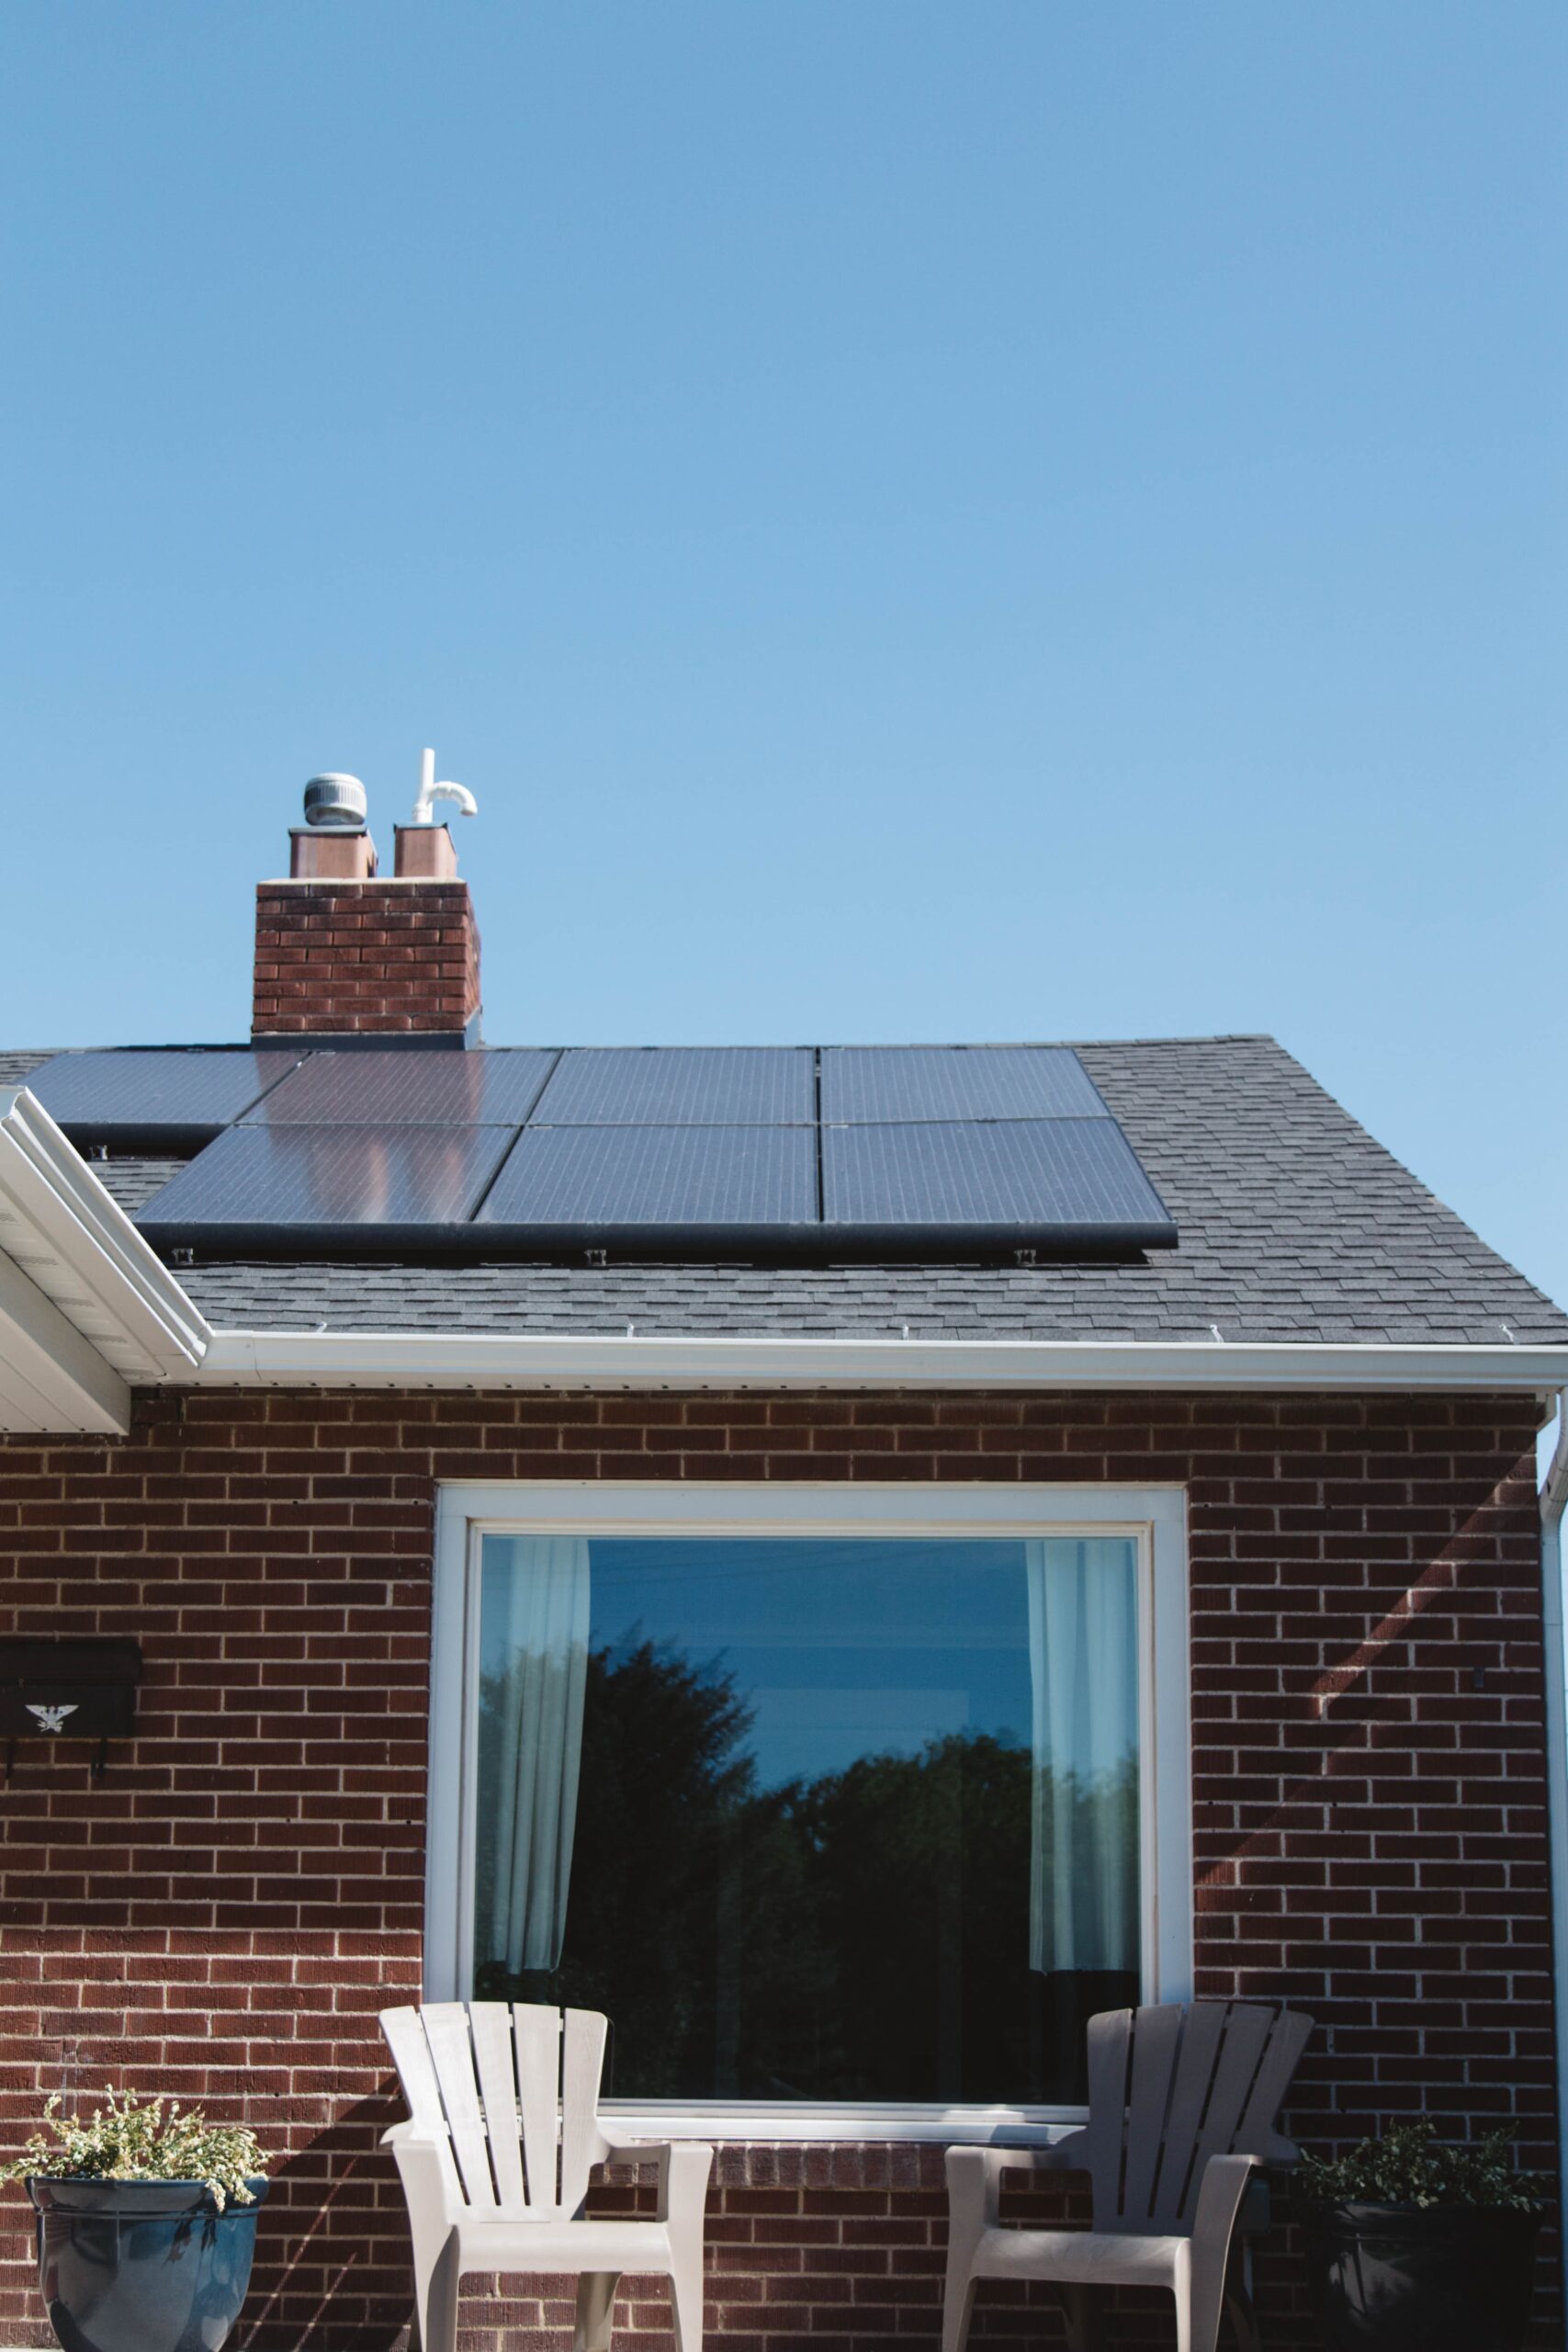 Do Solar Panels Damage Your Roof?